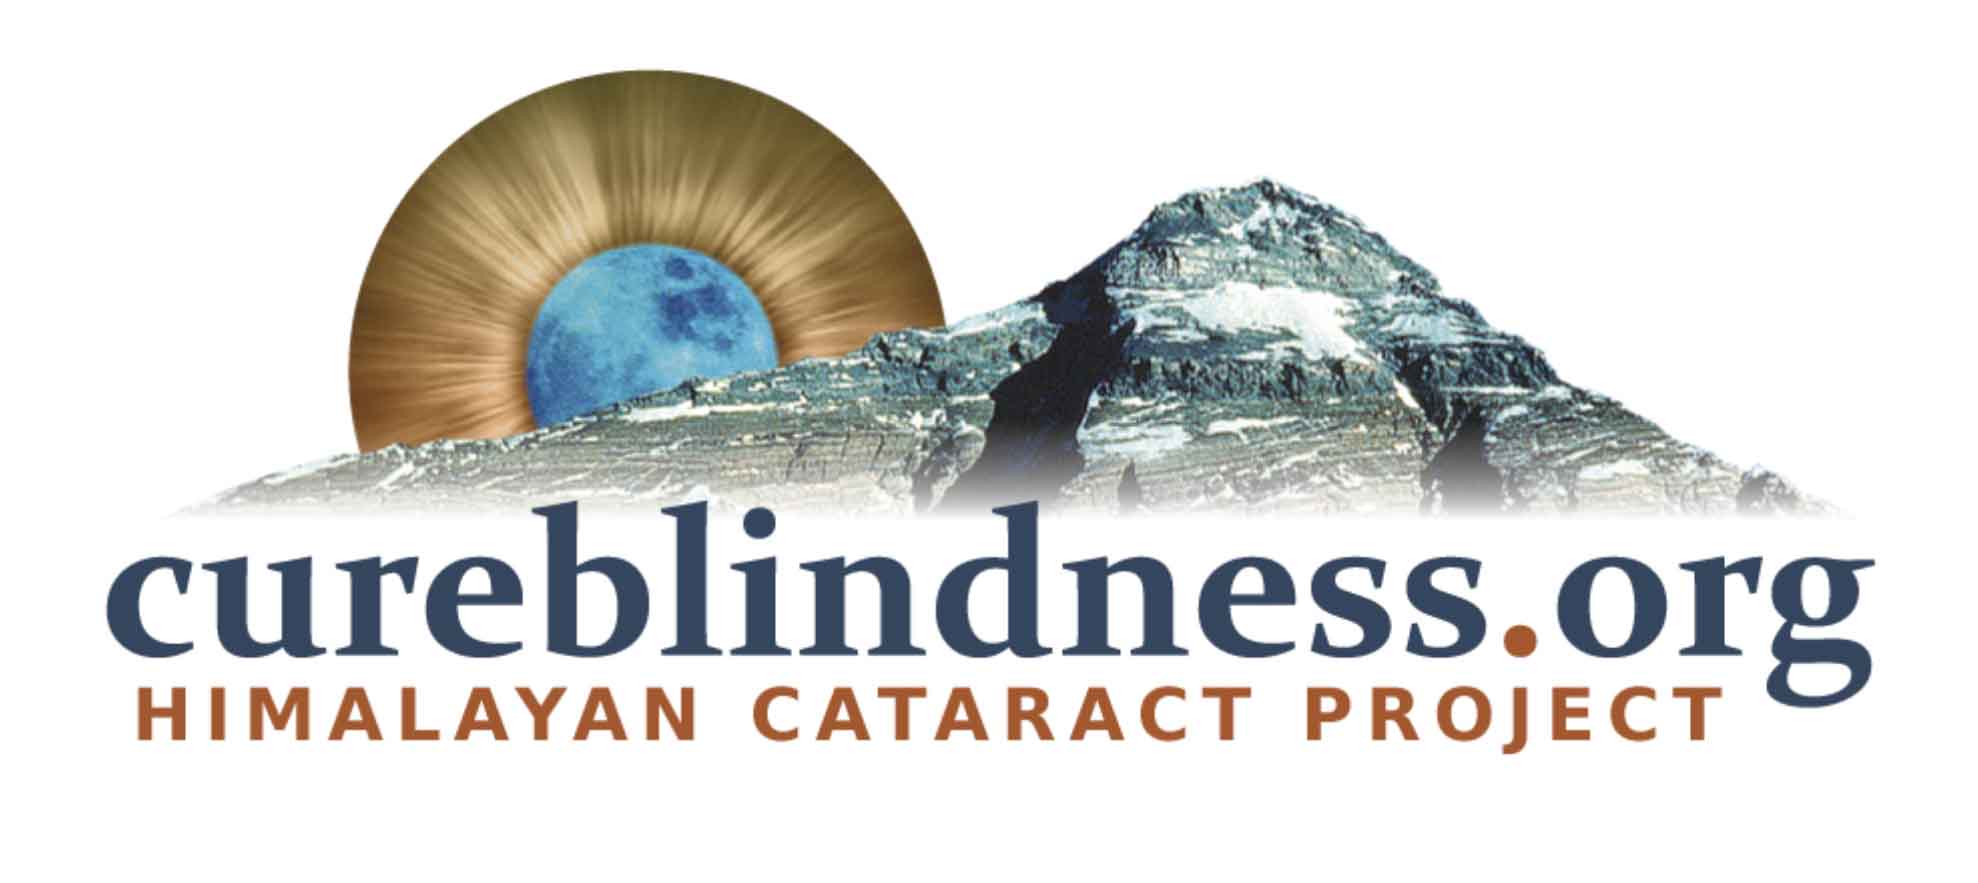 whim publishing is helipng cureblindness.org with each purchase